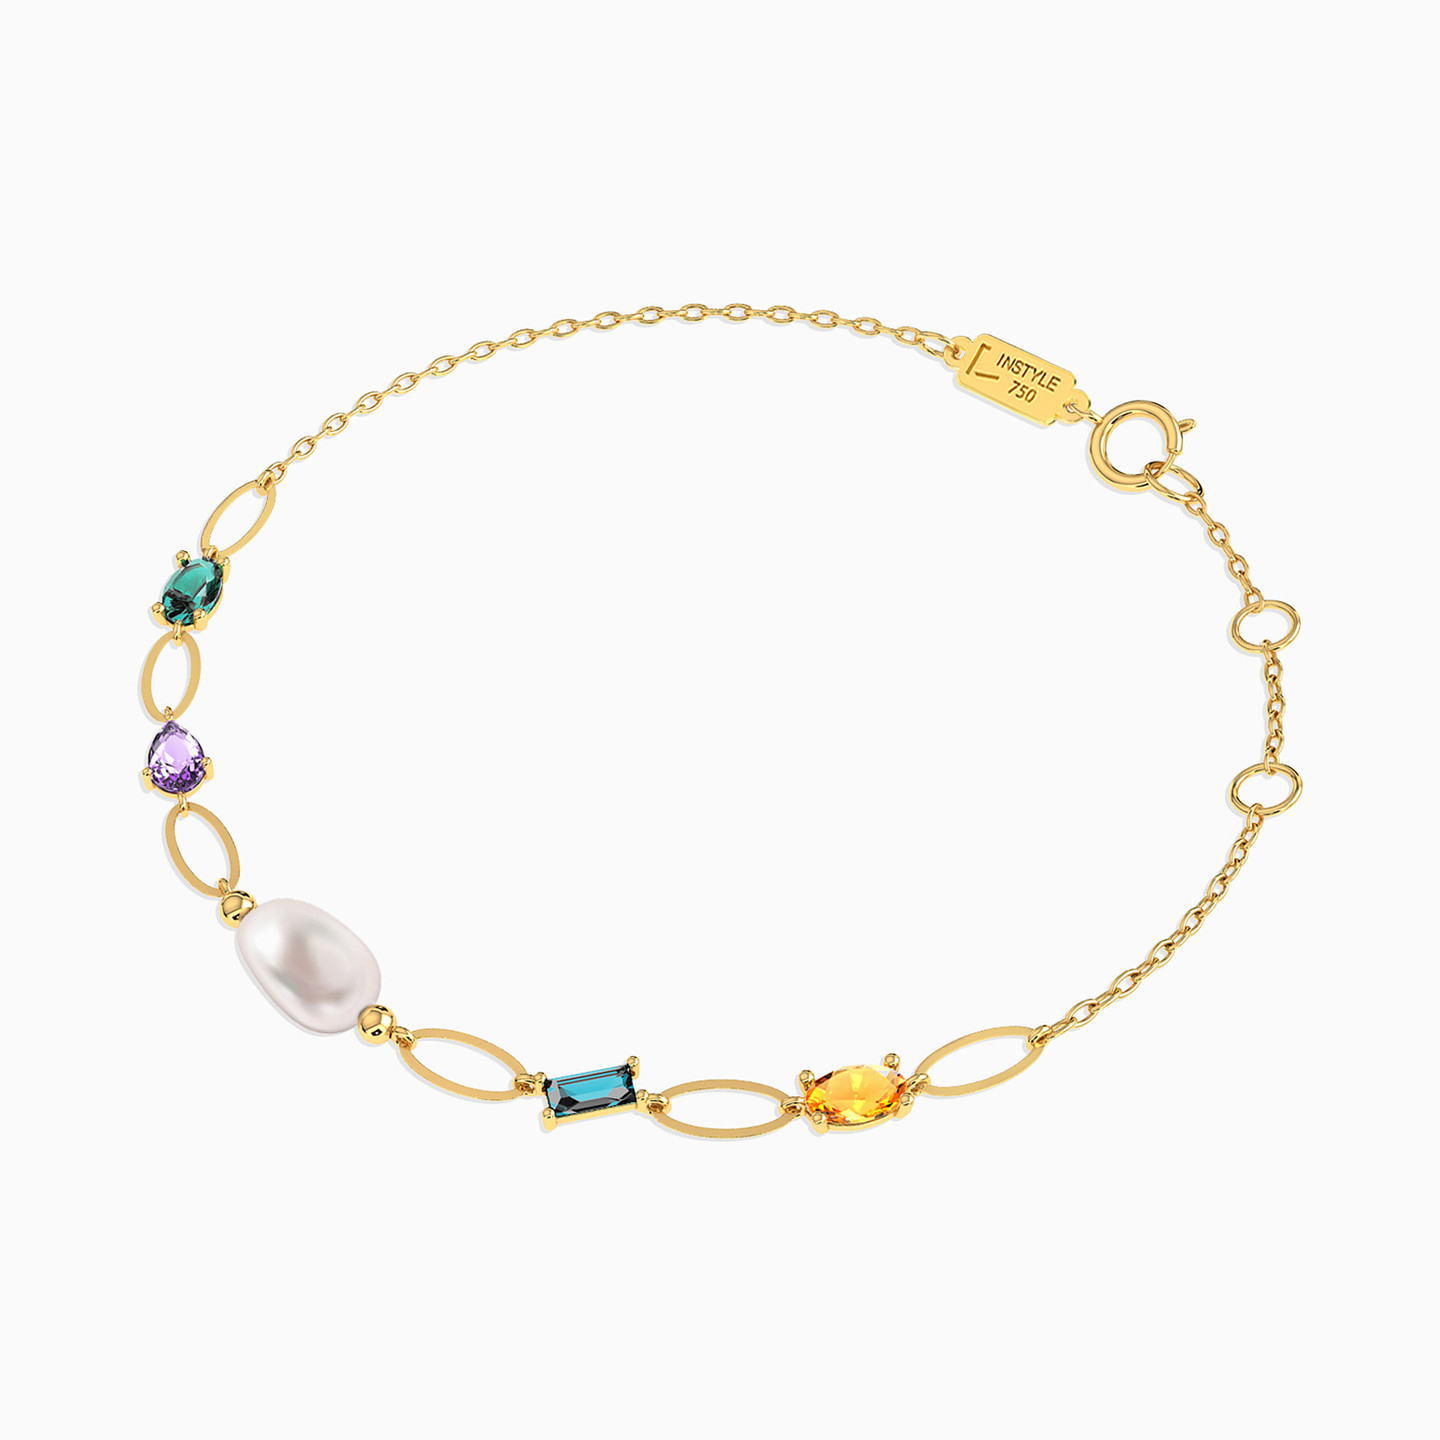 18K Gold Pearls & Colored Stones Chain Bracelet - 2